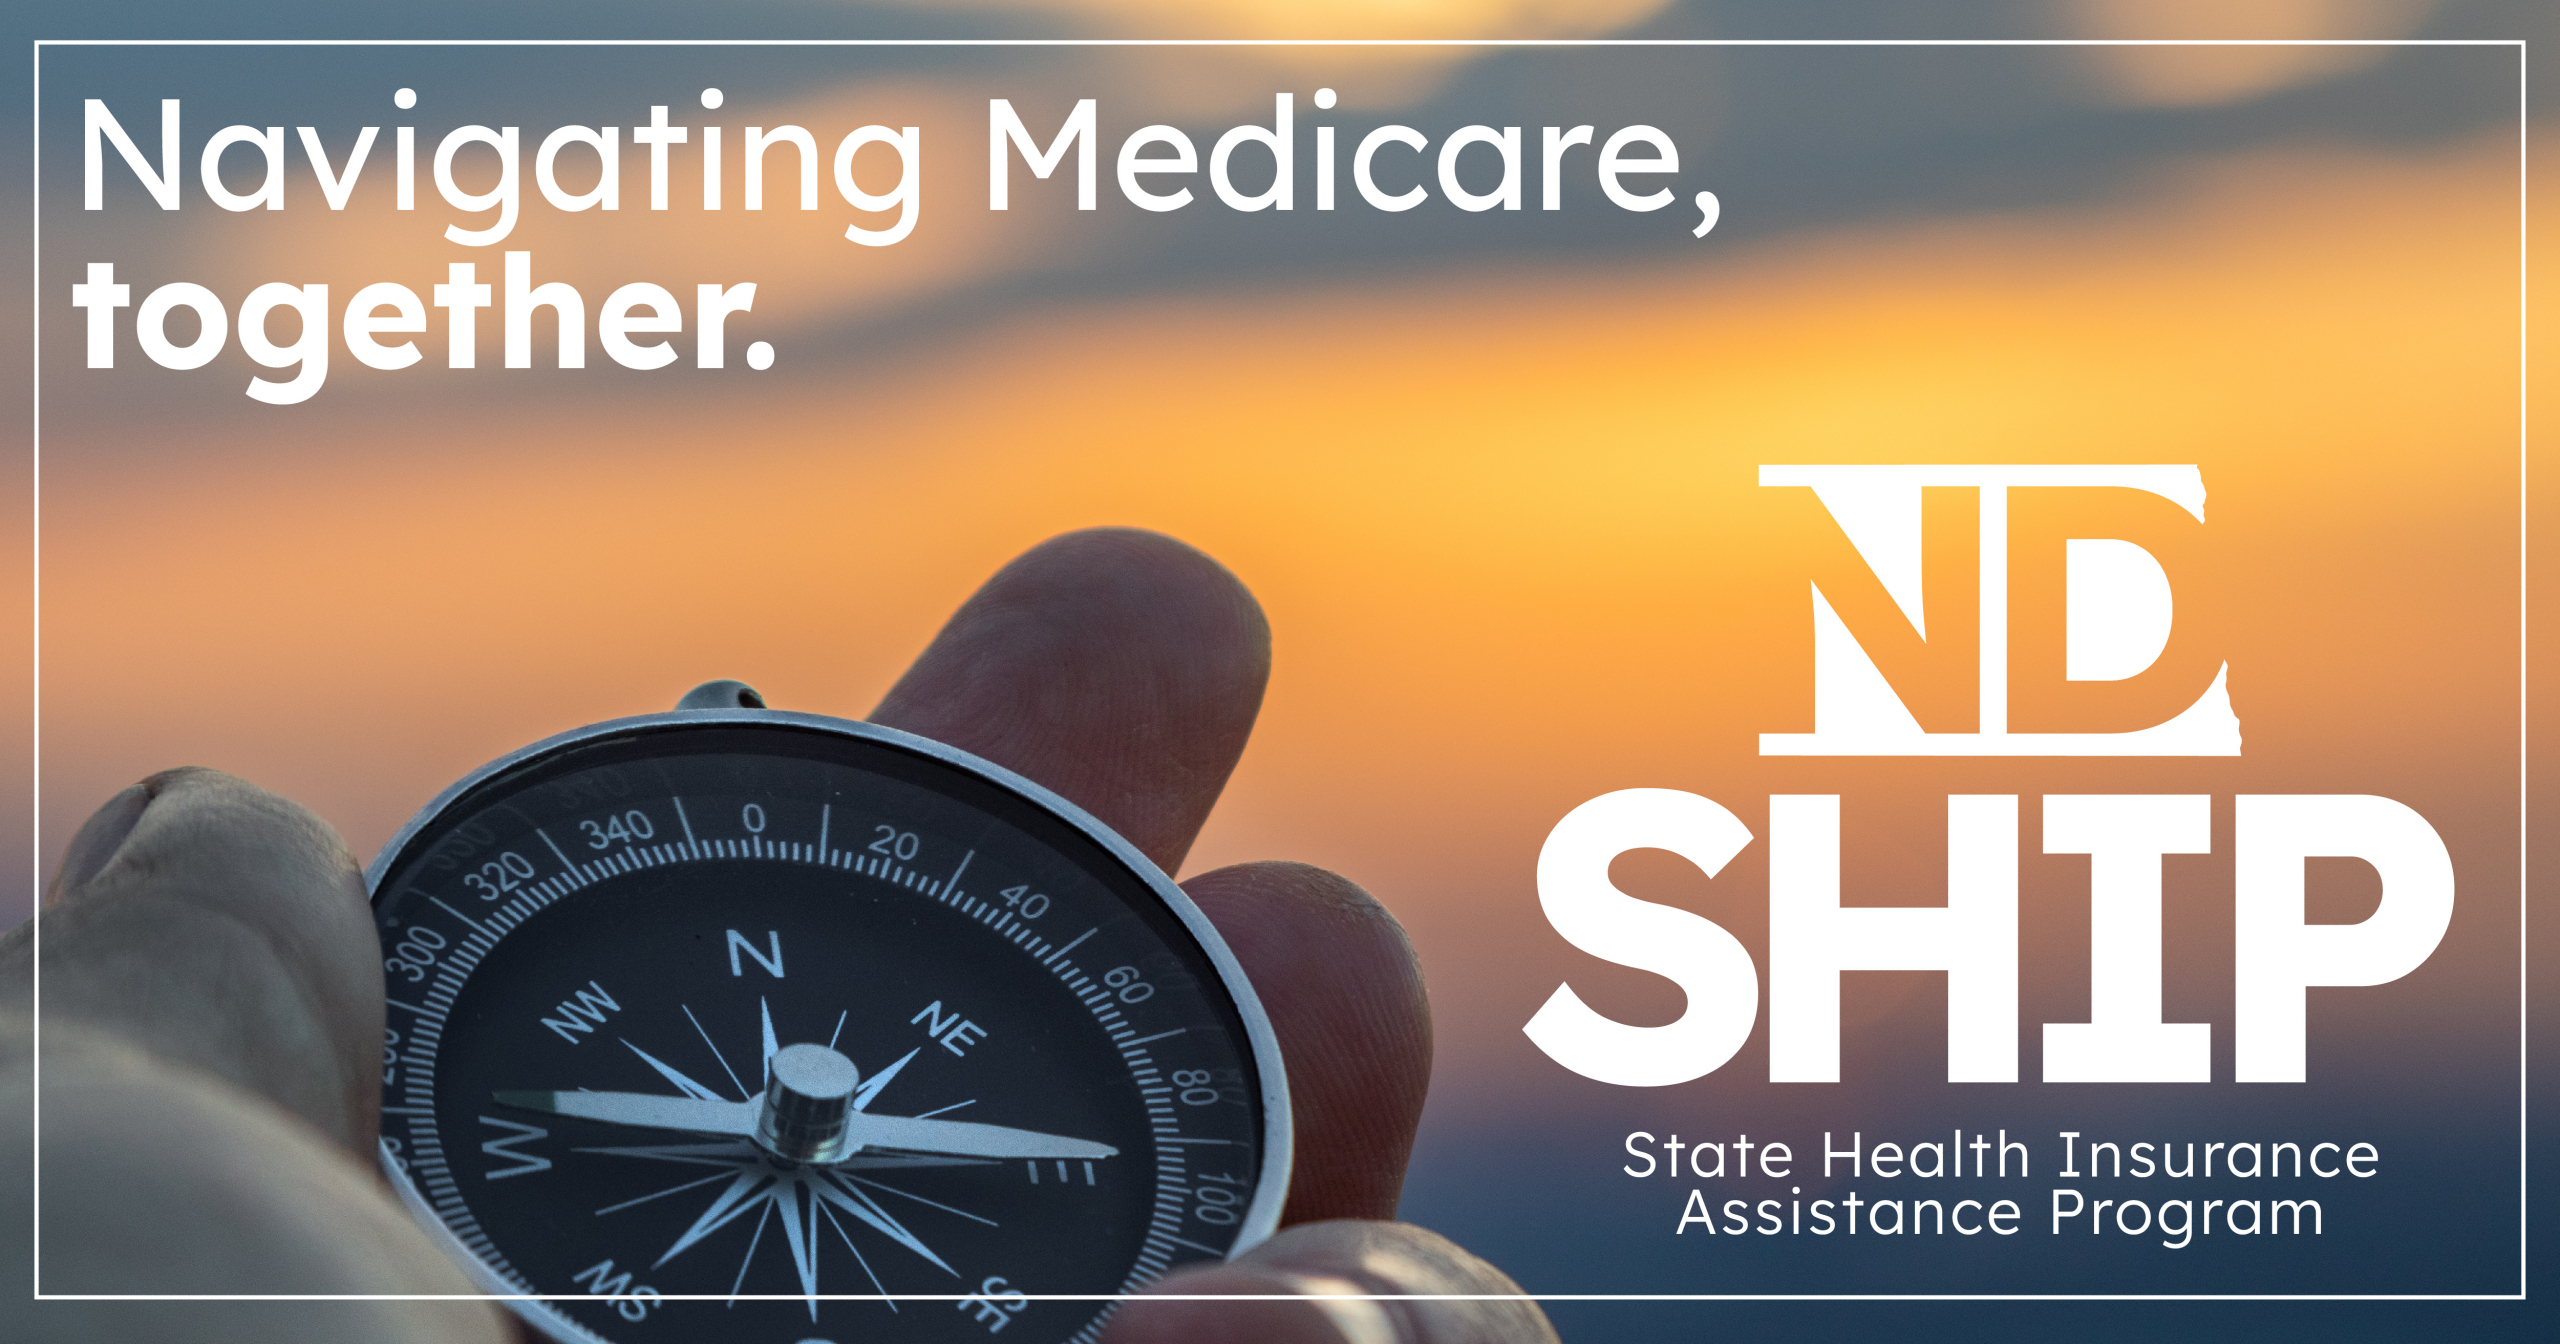 Navigating Medicare, together. ND SHIP - State Health Insurance Assistance Program. Background: person holding a compass.